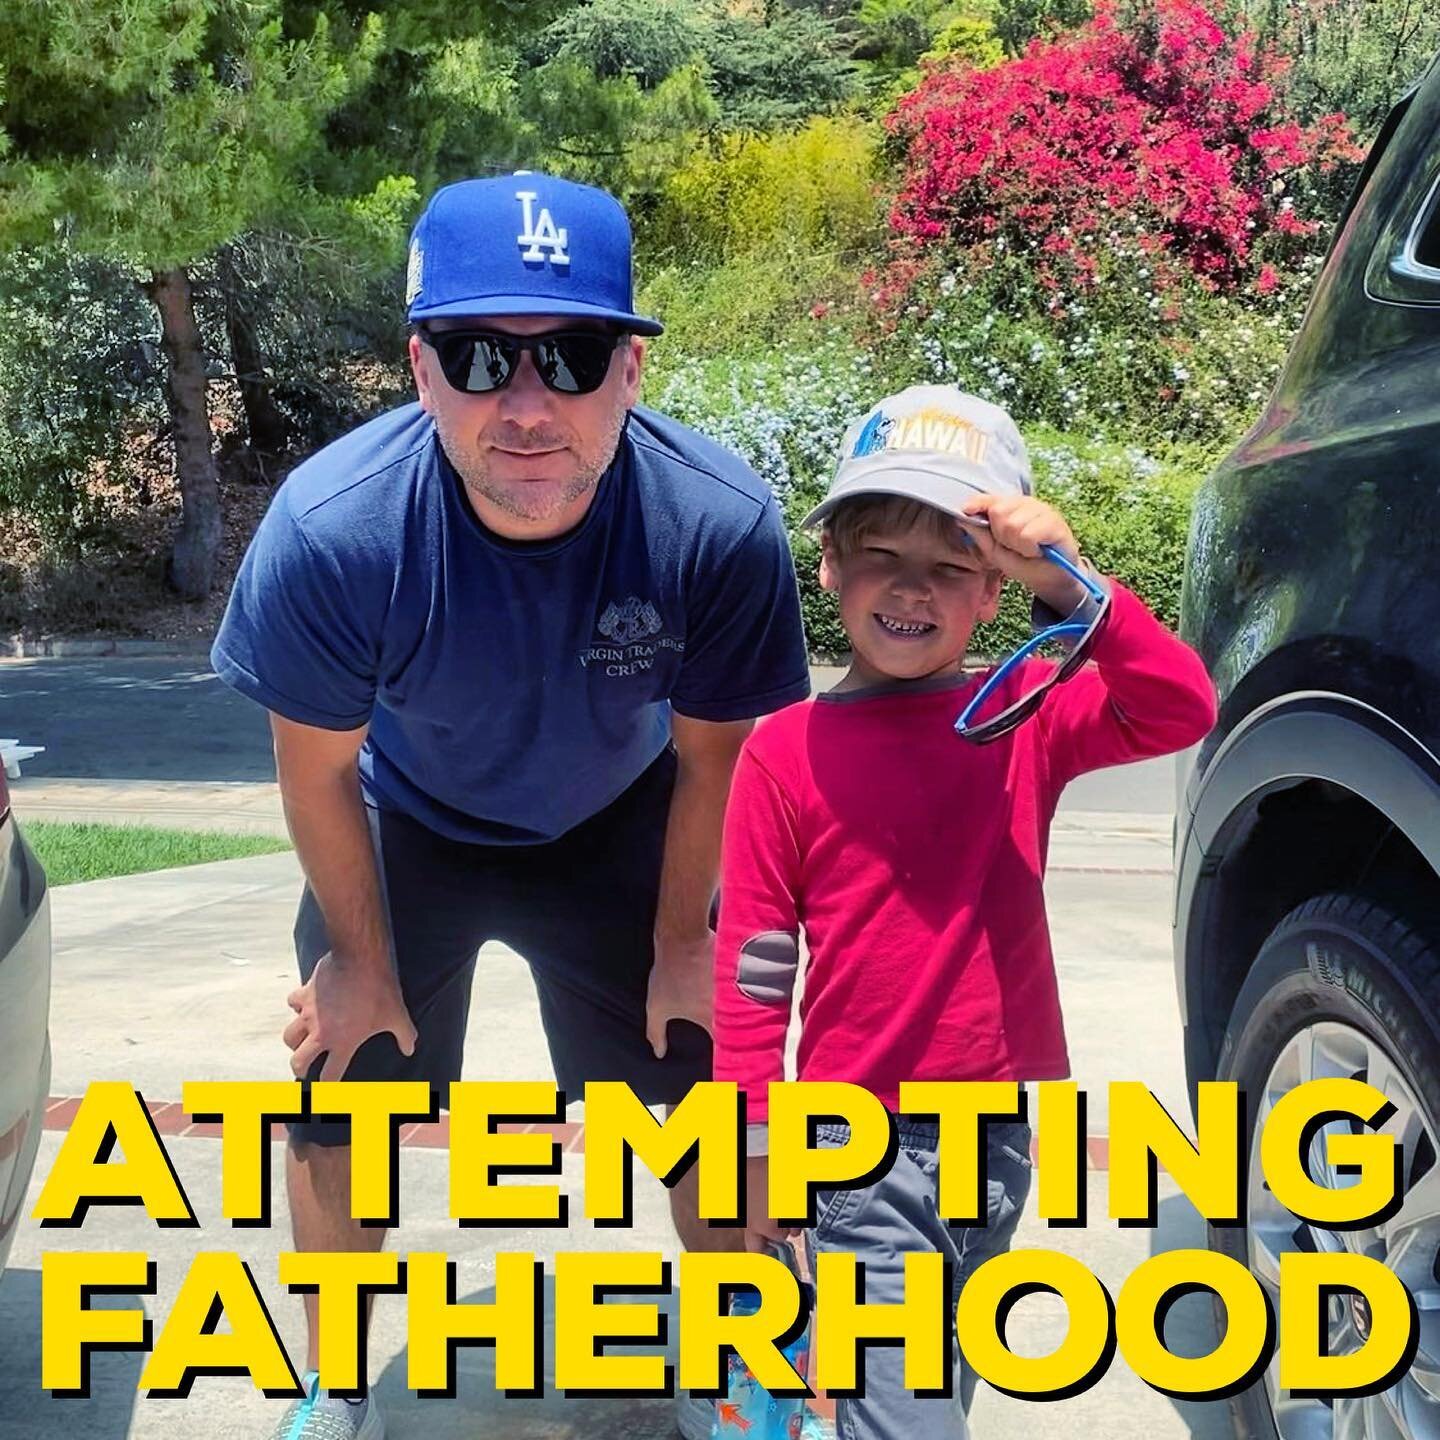 This week @thelukewahl (VP or digital video at Nickelodeon) is Attempting Fatherhood and I couldn&rsquo;t be happier. 

Luke and I go back to my days hosting a car show called Translogic. He was my producer and over four years we went from co-workers